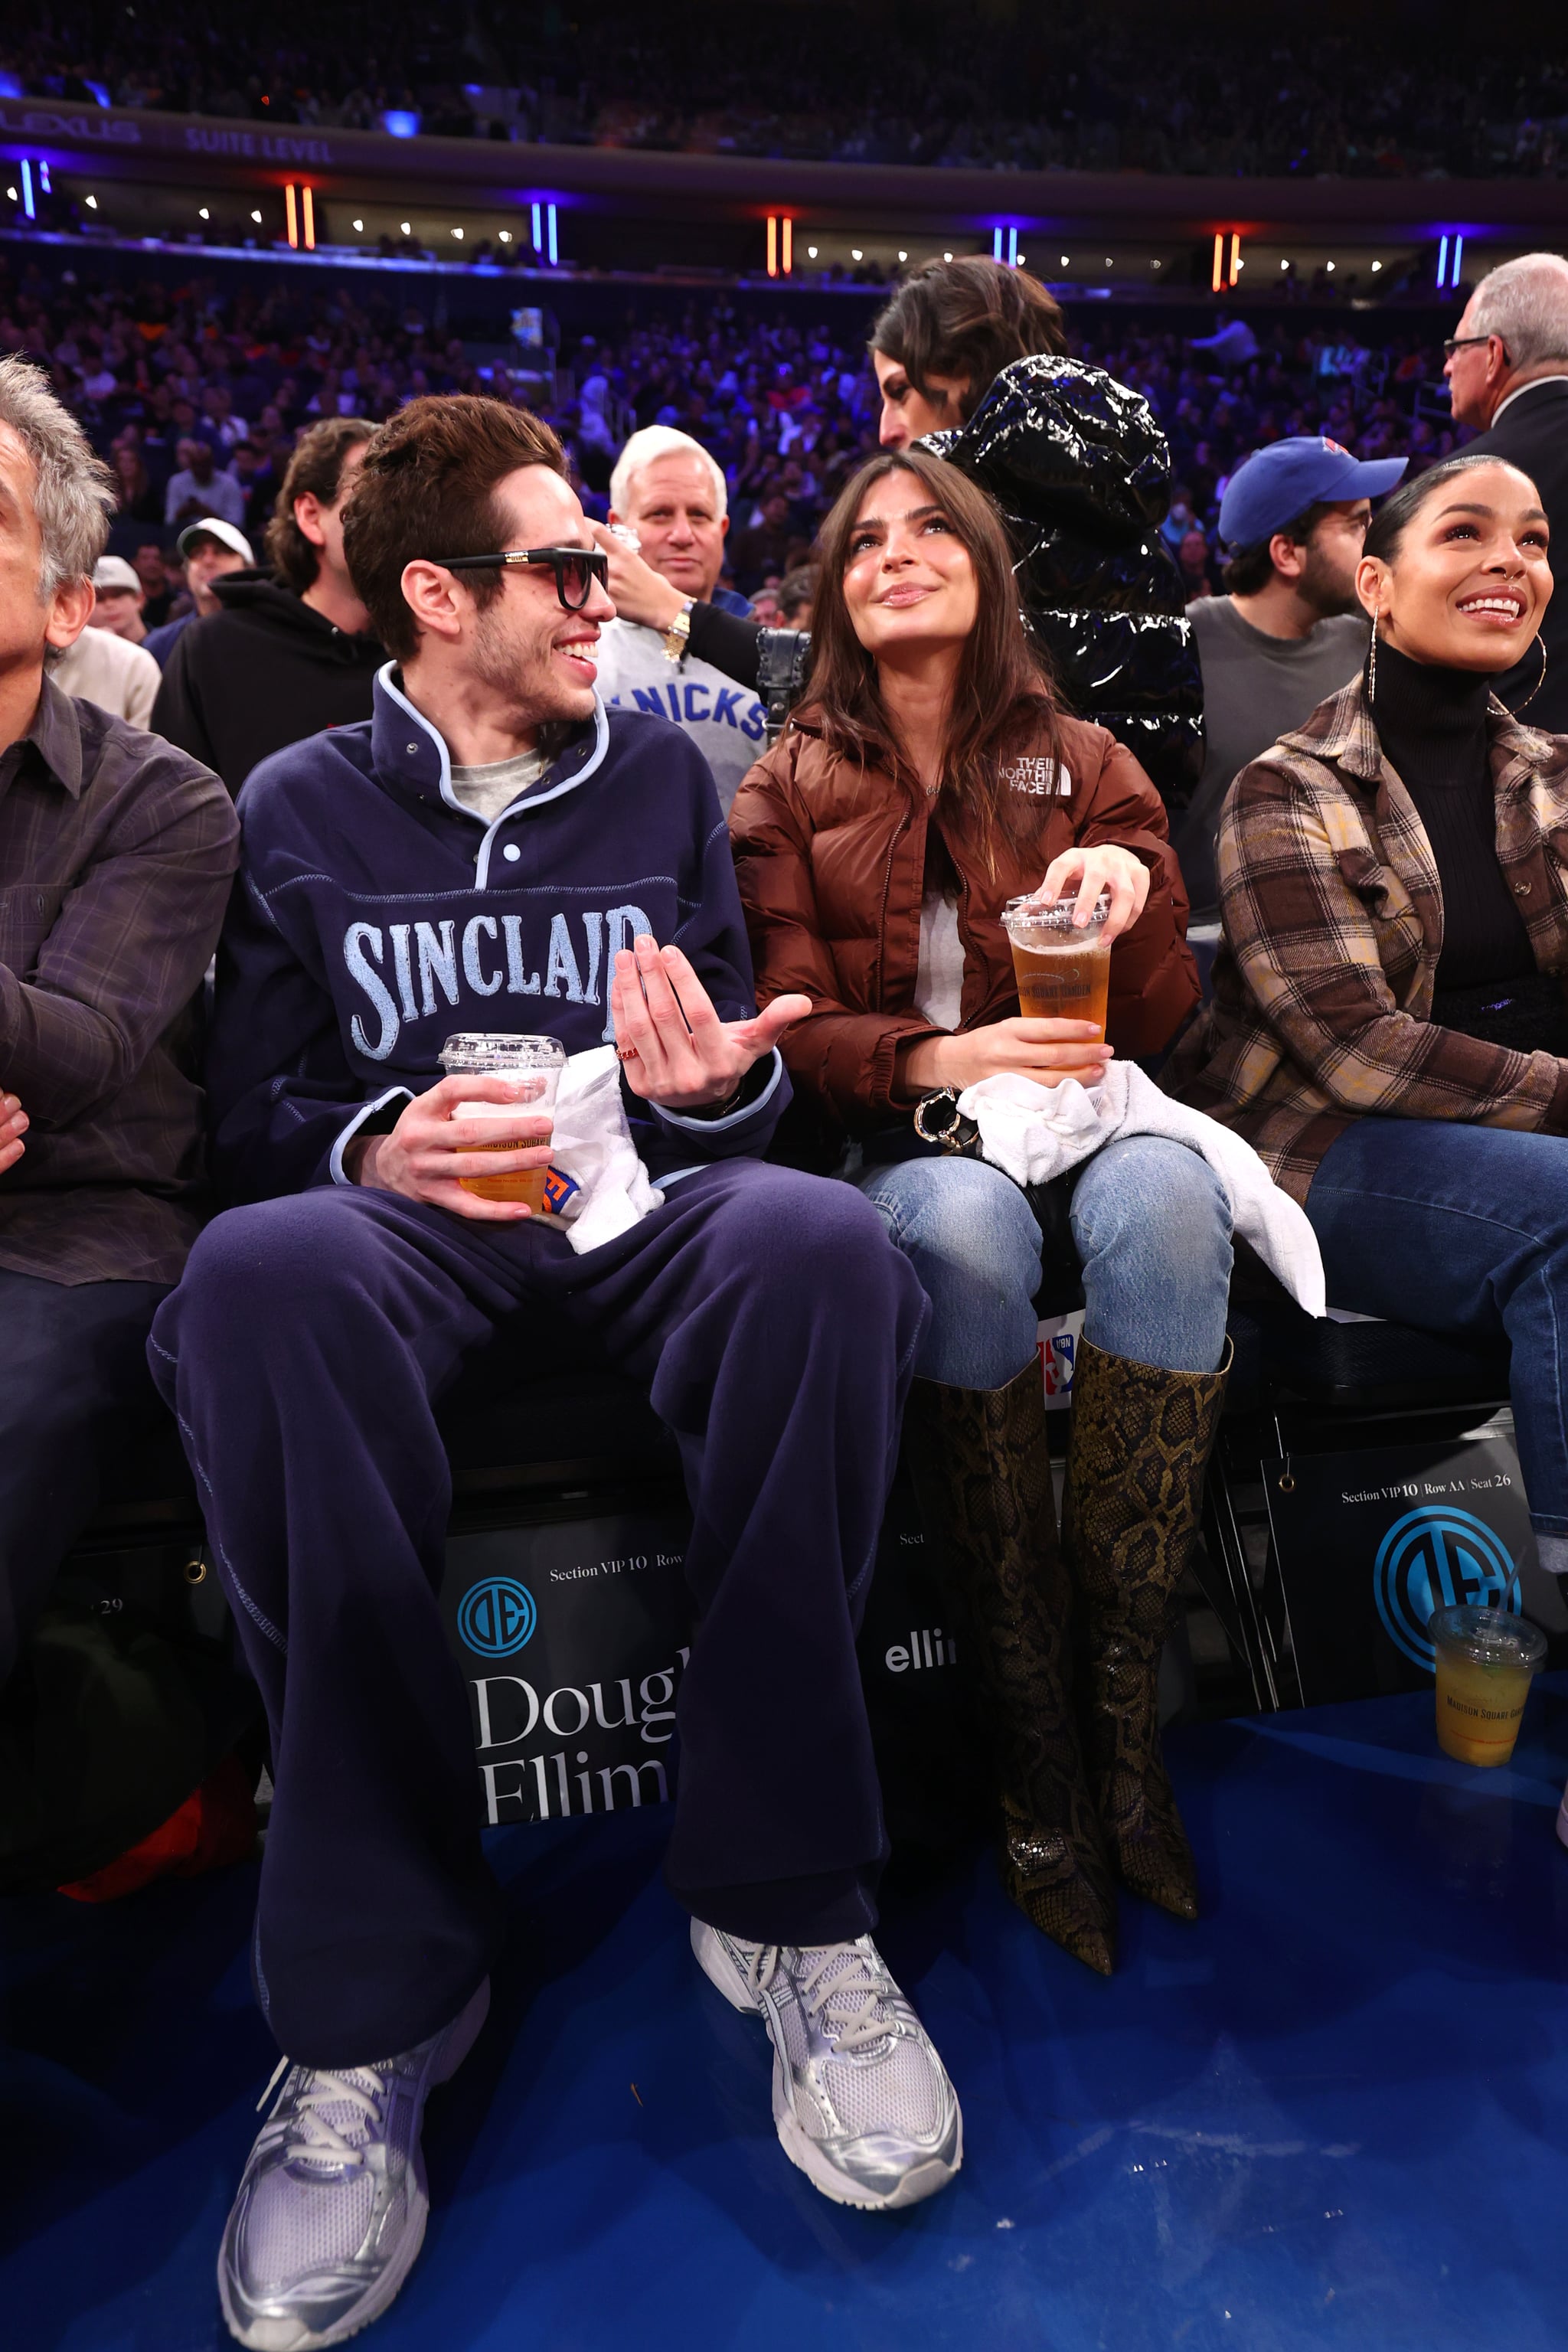 NEW YORK, NY - NOVEMBER 27: Actor Pete Davidson and Model Emily Ratajkowski attend a game between the Memphis Grizzlies and the New York Knicks on November 27, 2022 at Madison Square Garden in New York City, New York.  NOTE TO USER: User expressly acknowledges and agrees that, by downloading and or using this photograph, User is consenting to the terms and conditions of the Getty Images License Agreement. Mandatory Copyright Notice: Copyright 2022 NBAE  (Photo by Nathaniel S. Butler/NBAE via Getty Images)